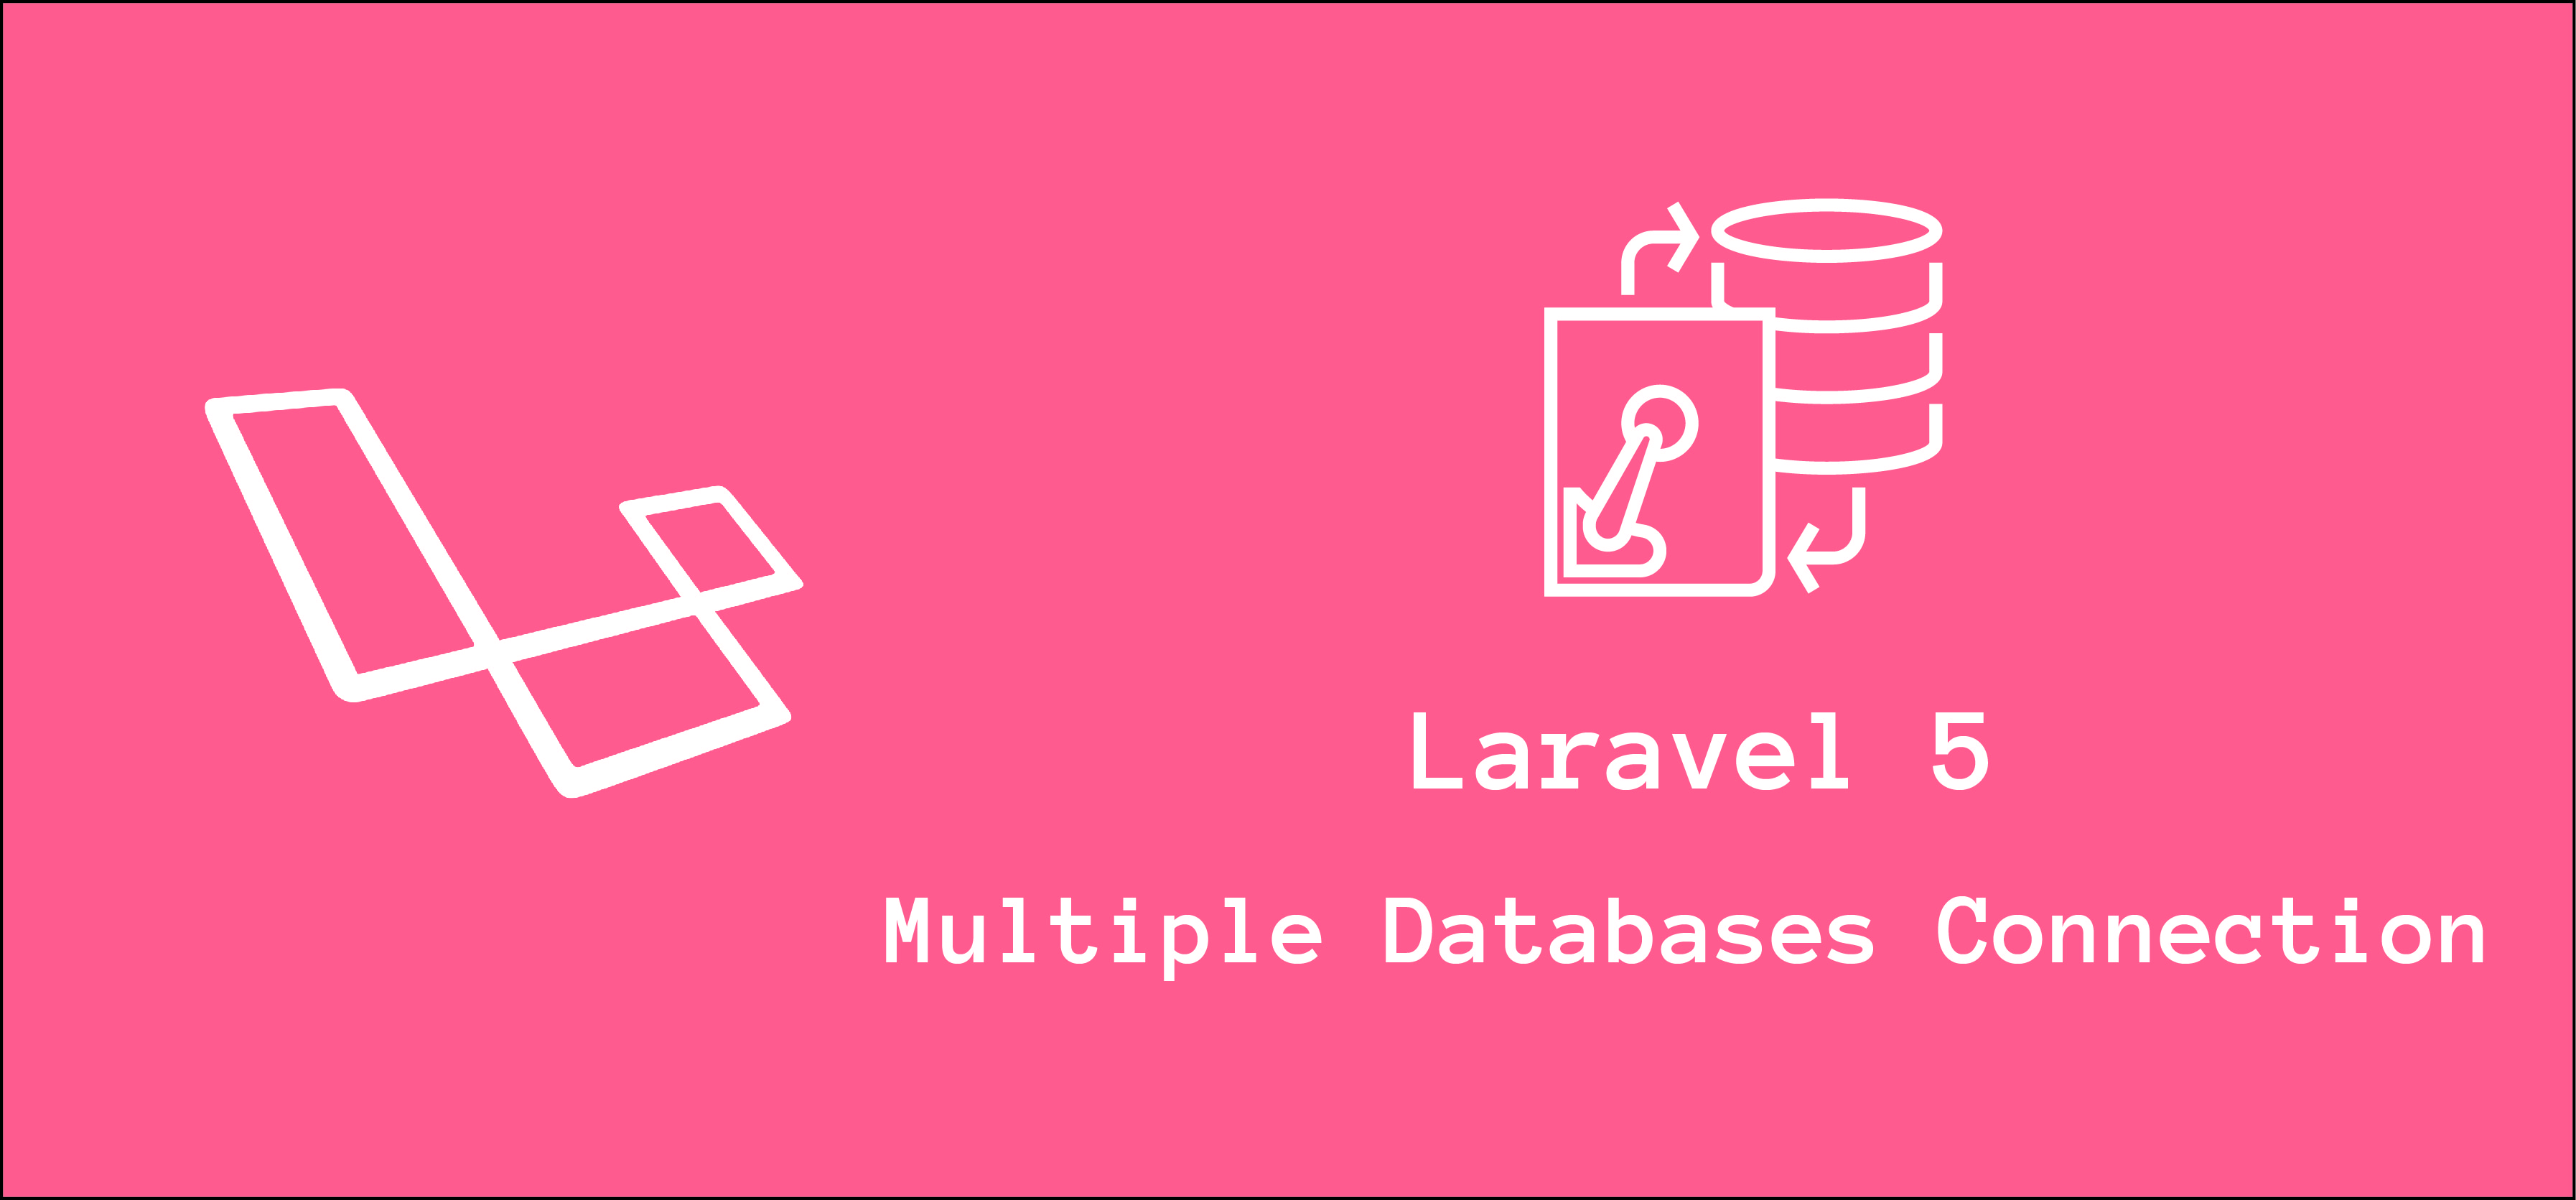 Lets see how to connect Laravel with Postgres Database